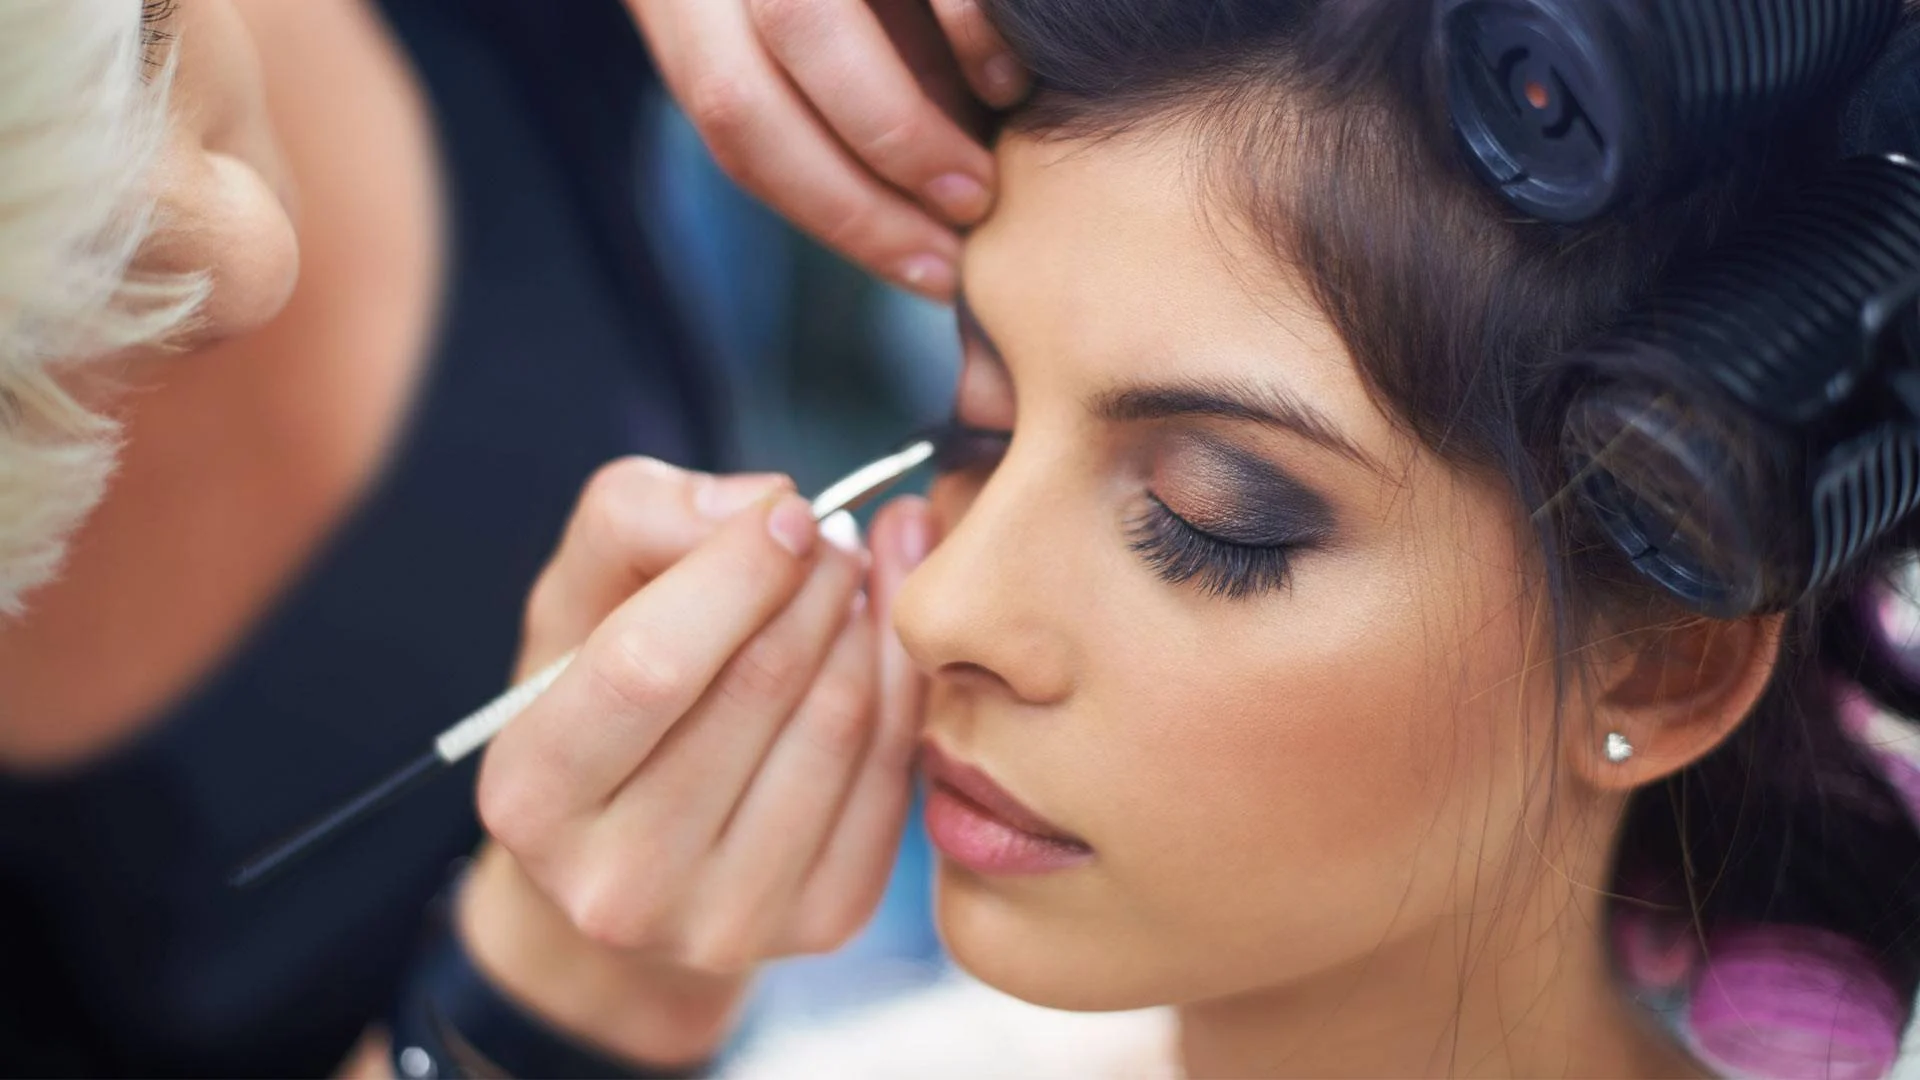 Hair or Makeup First for Prom: What Should You Do?